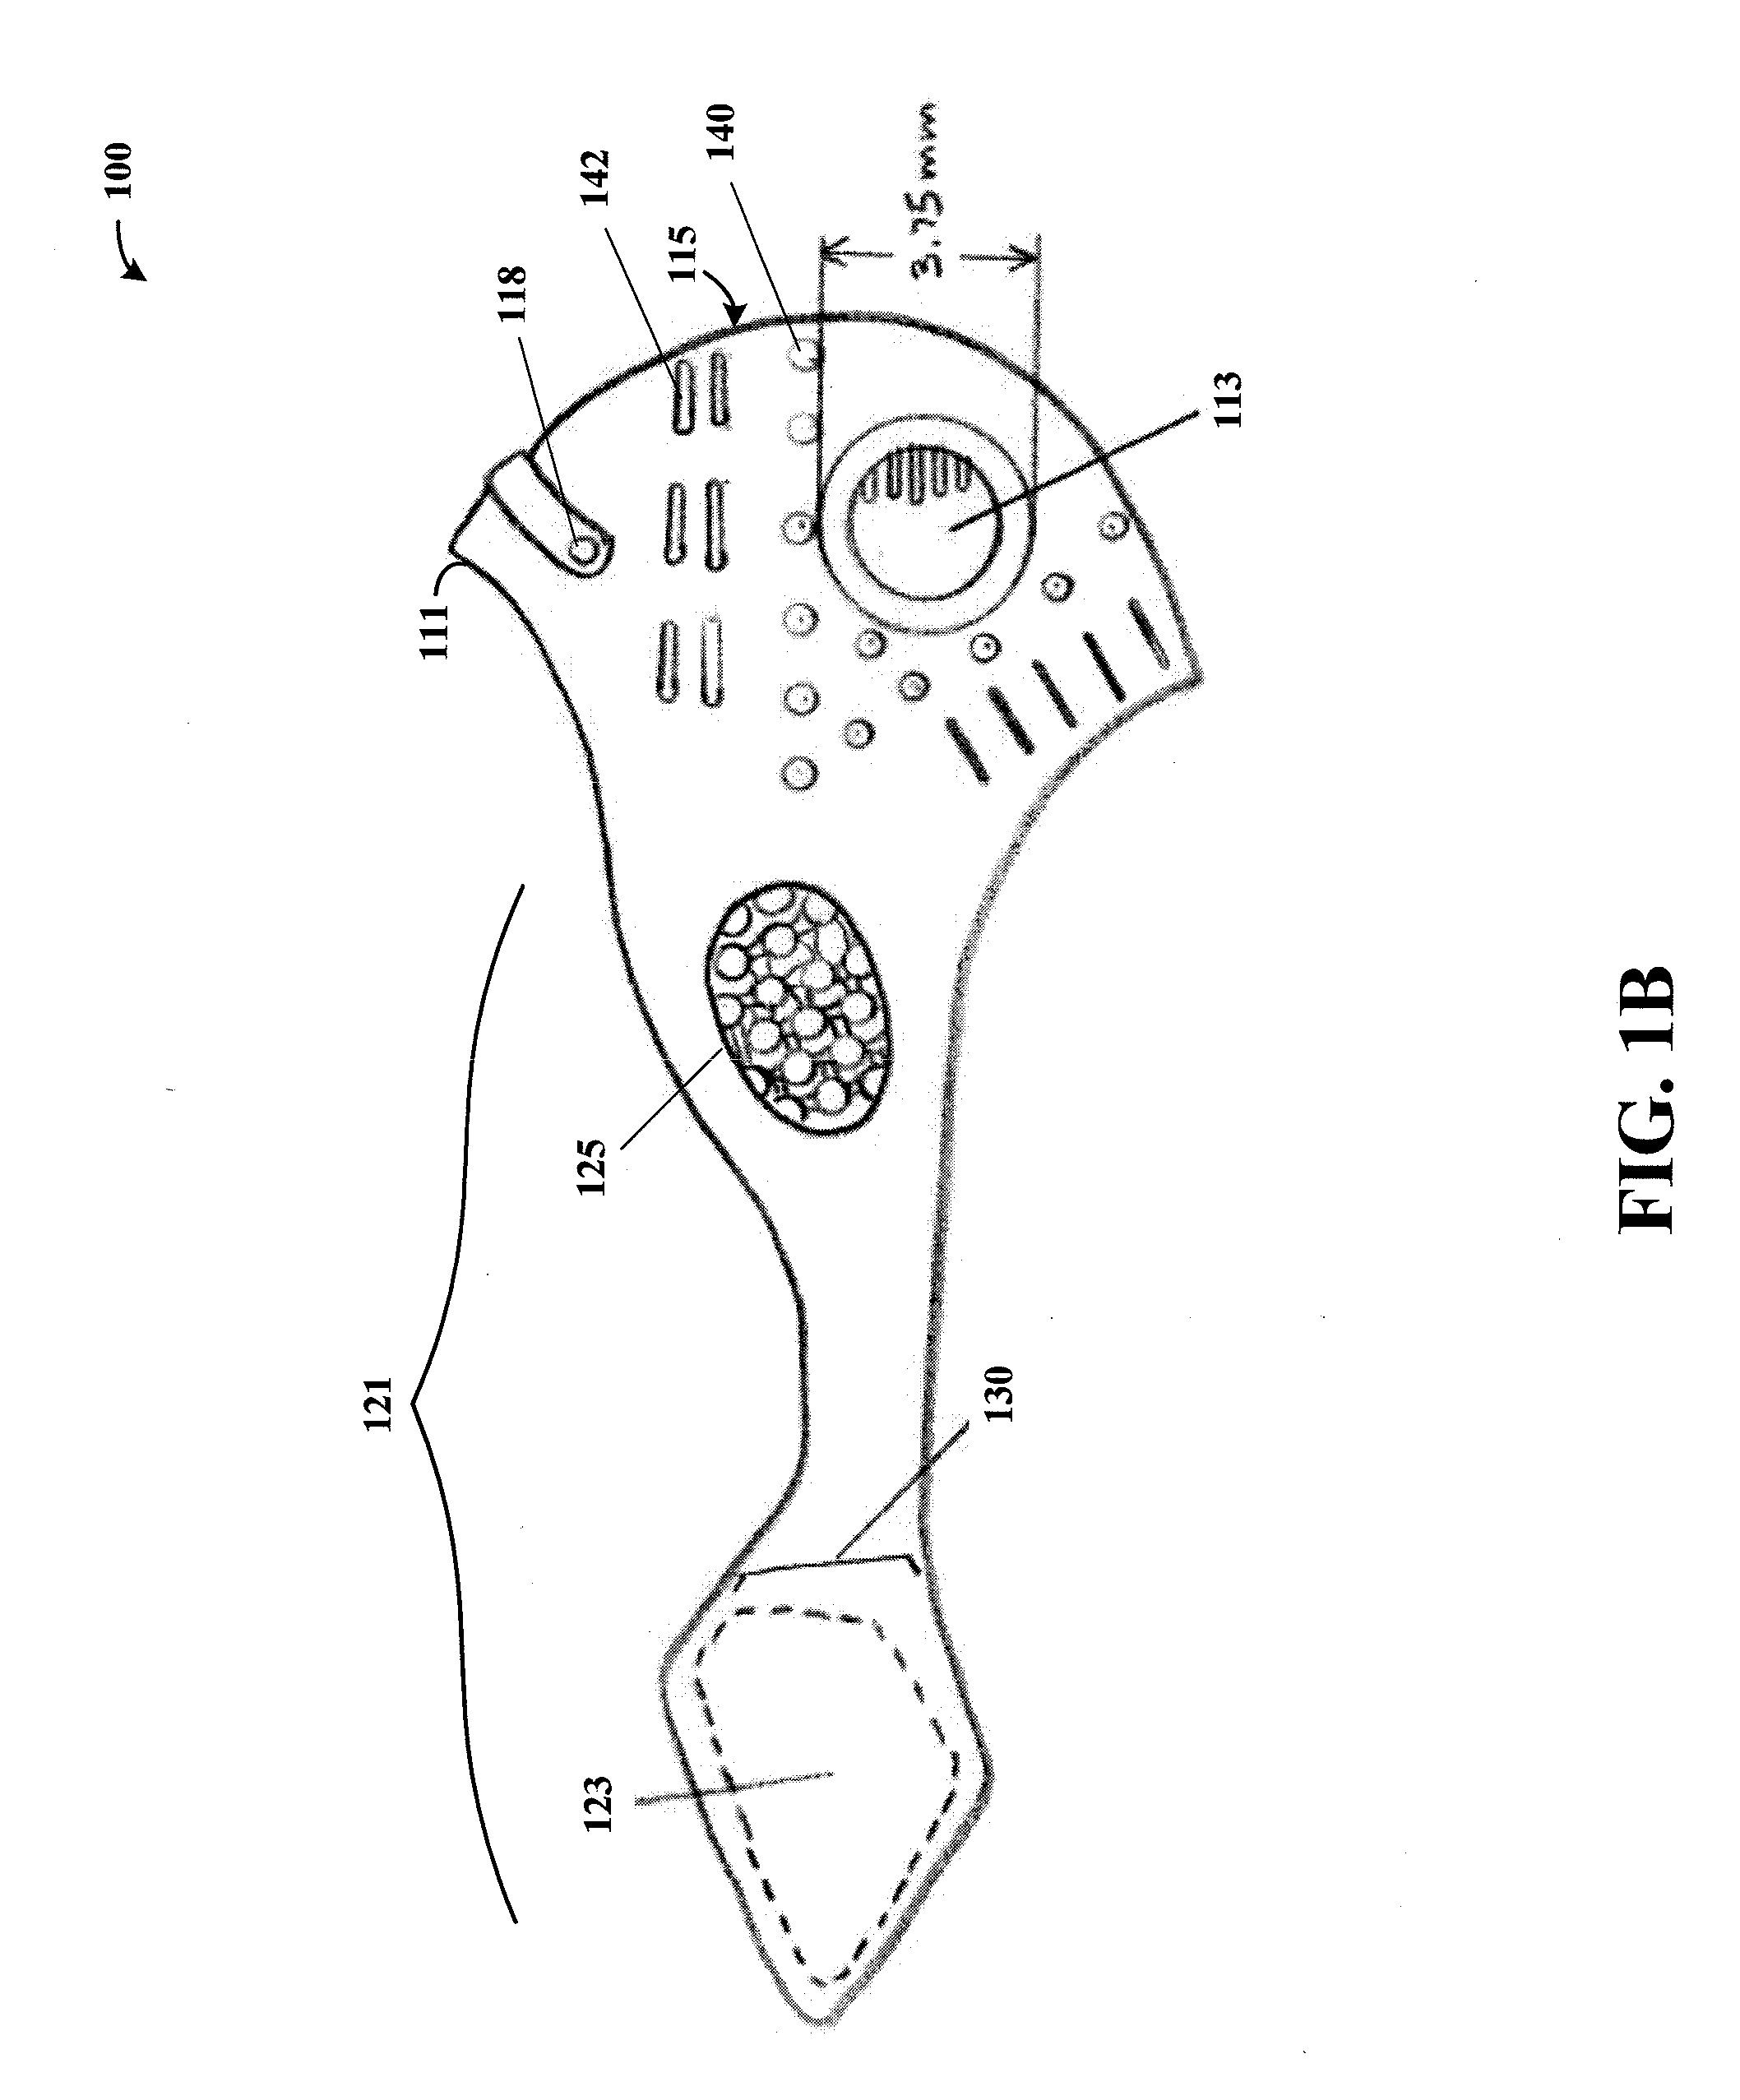 Face mask apparatus and system